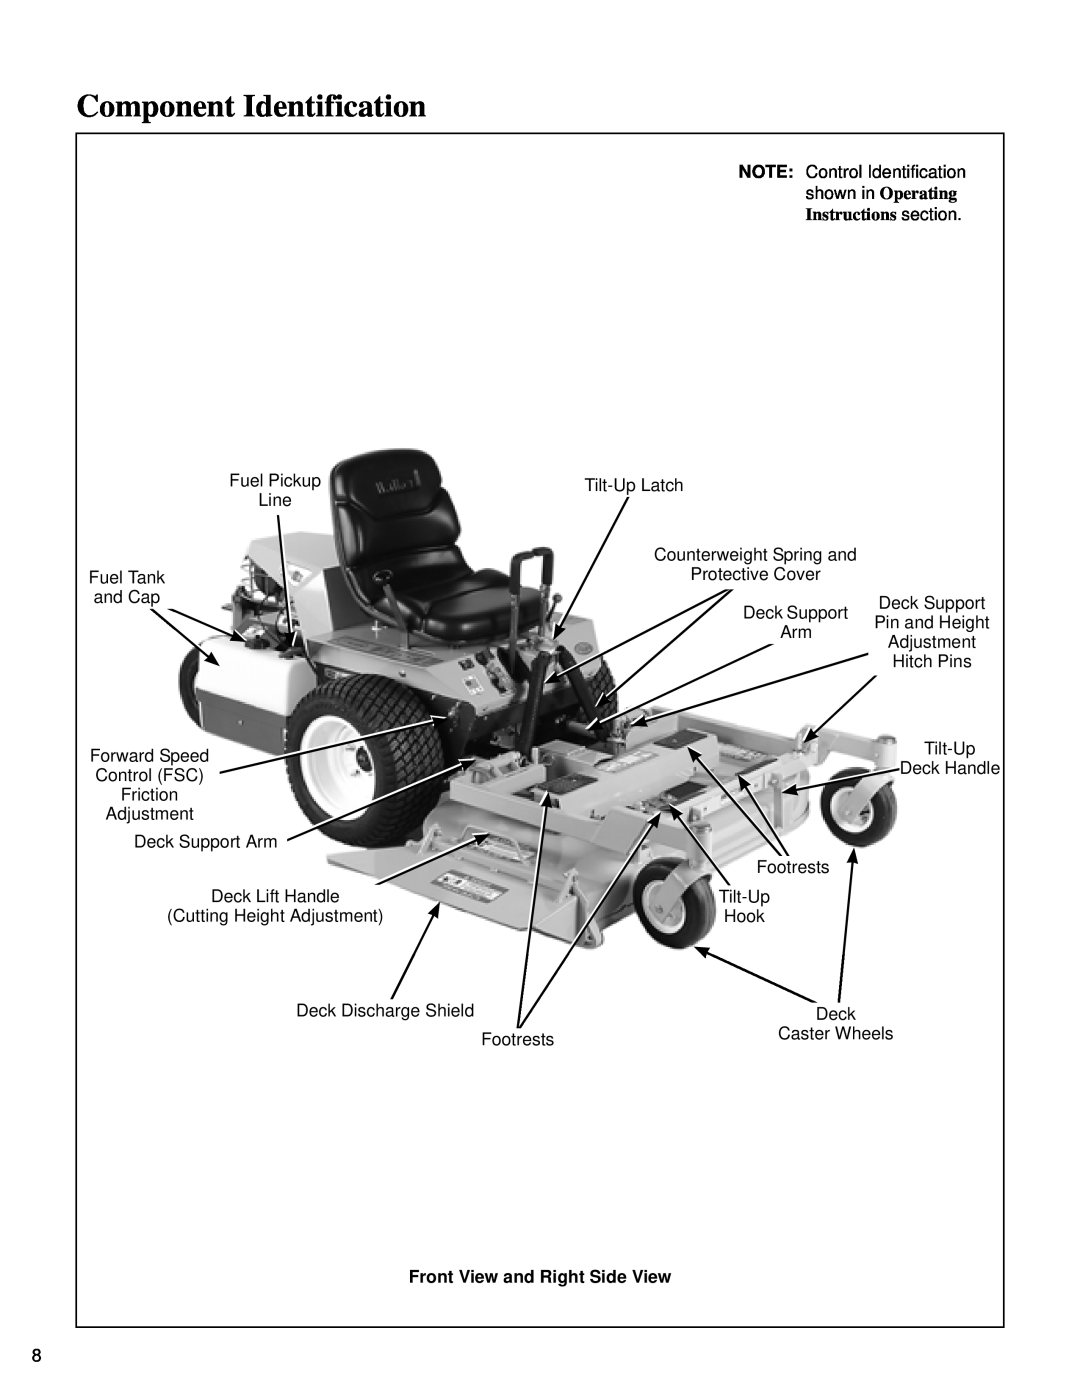 Briggs & Stratton MB (18 HP) owner manual Component Identification, Front View and Right Side View 